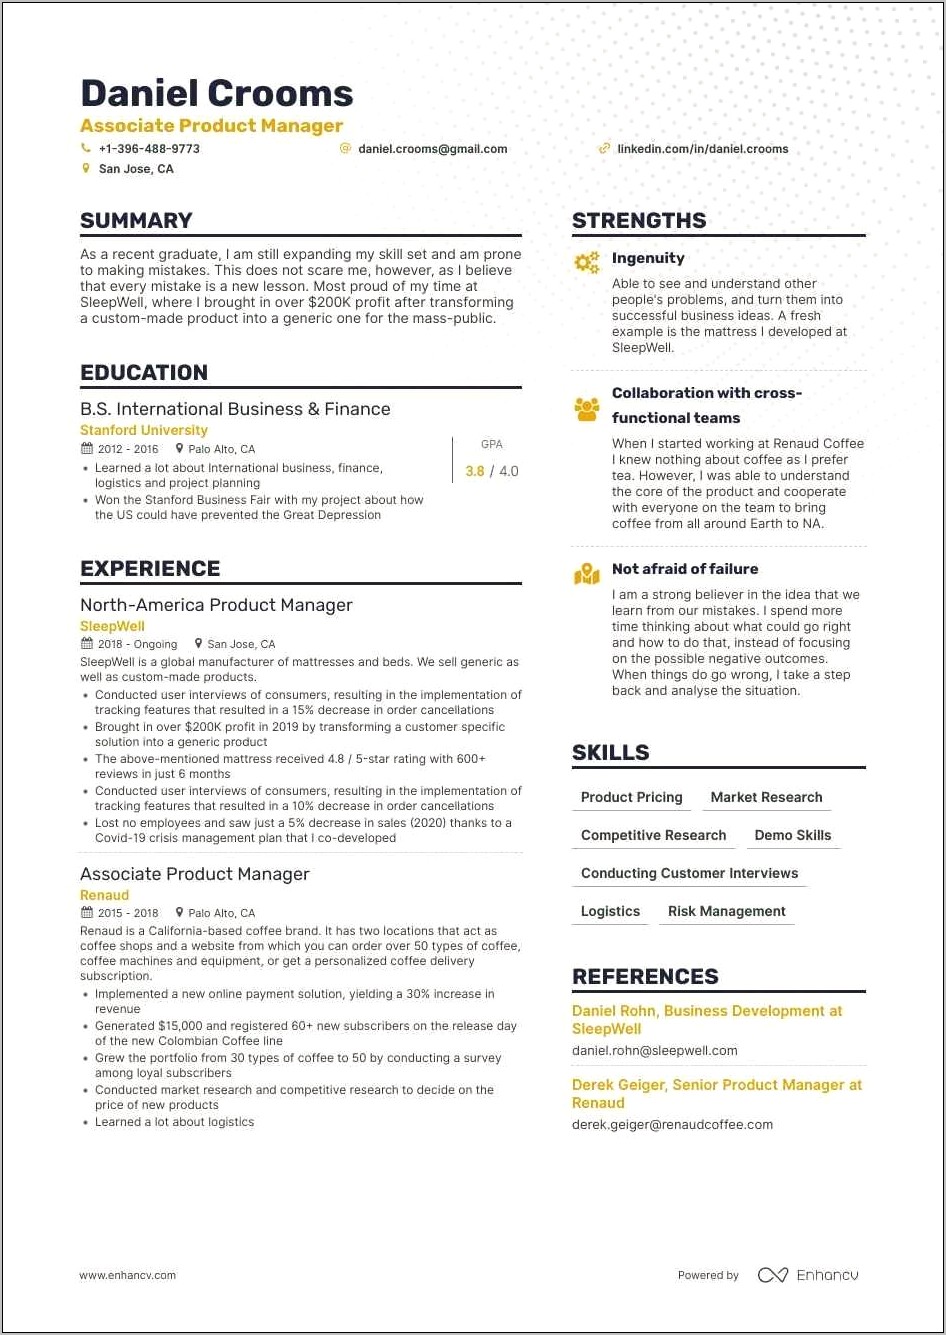 Product Manager Resume Templates Free